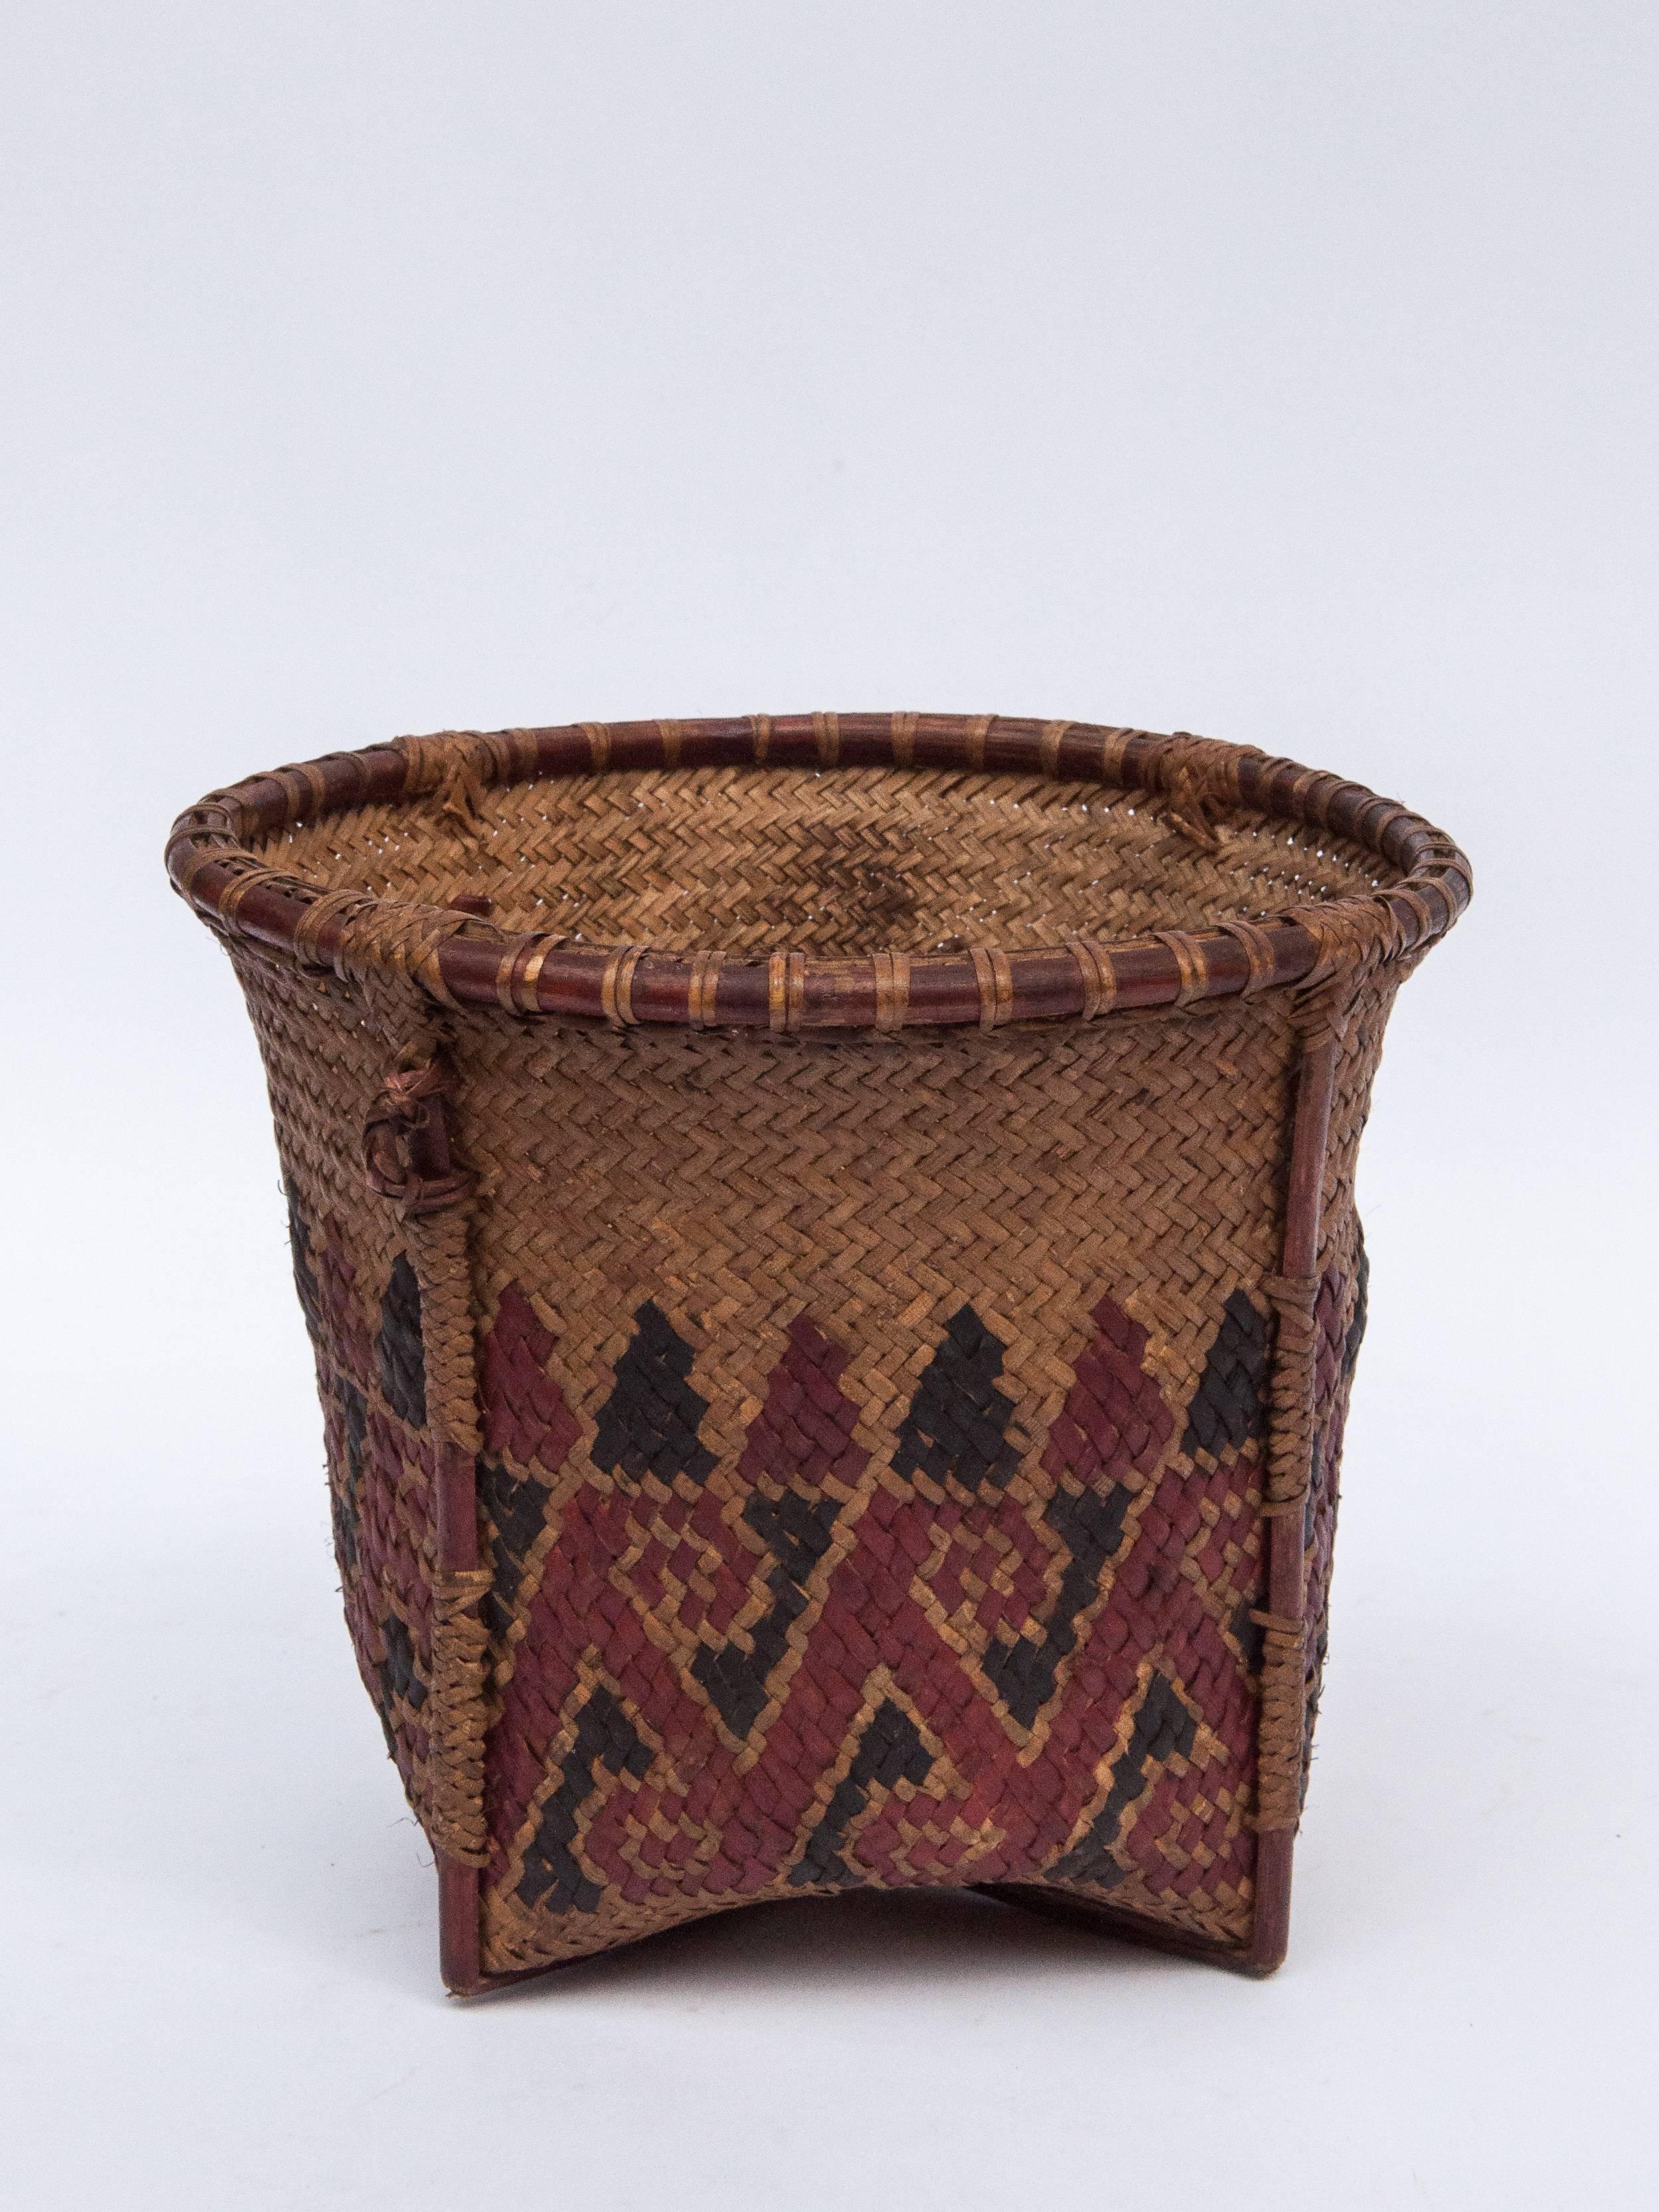 Small vintage collecting basket with colored design. Borneo, mid-20th century.
Offered by Bruce Hughes.
Rattan basket from west Borneo. Hand fashioned from rattan and bamboo with a colored design from natural dyes.
Dimensions: 8 inch diameter by